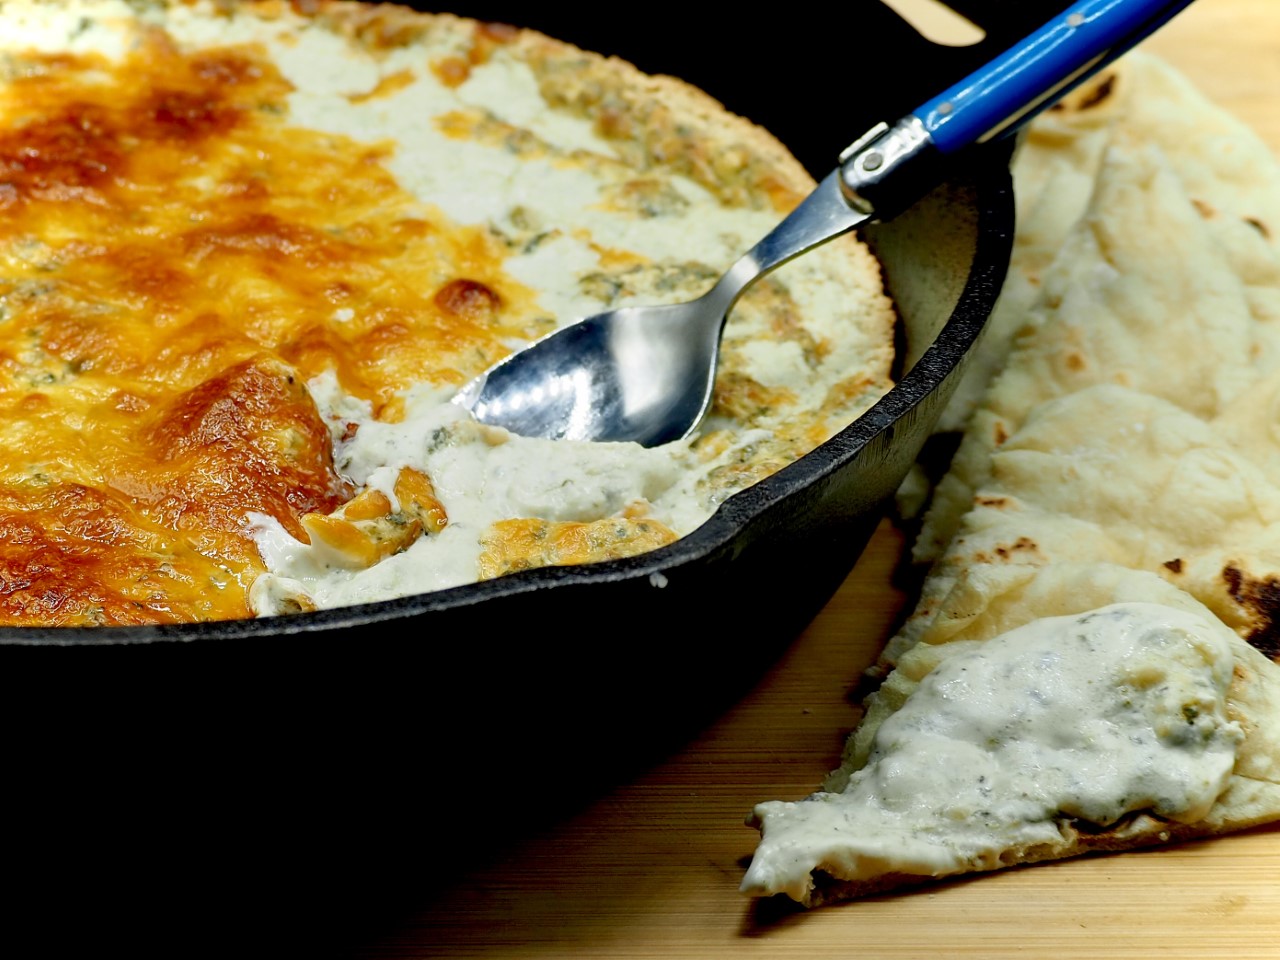 Homemade Hot and Creamy Baked Spinach Dip